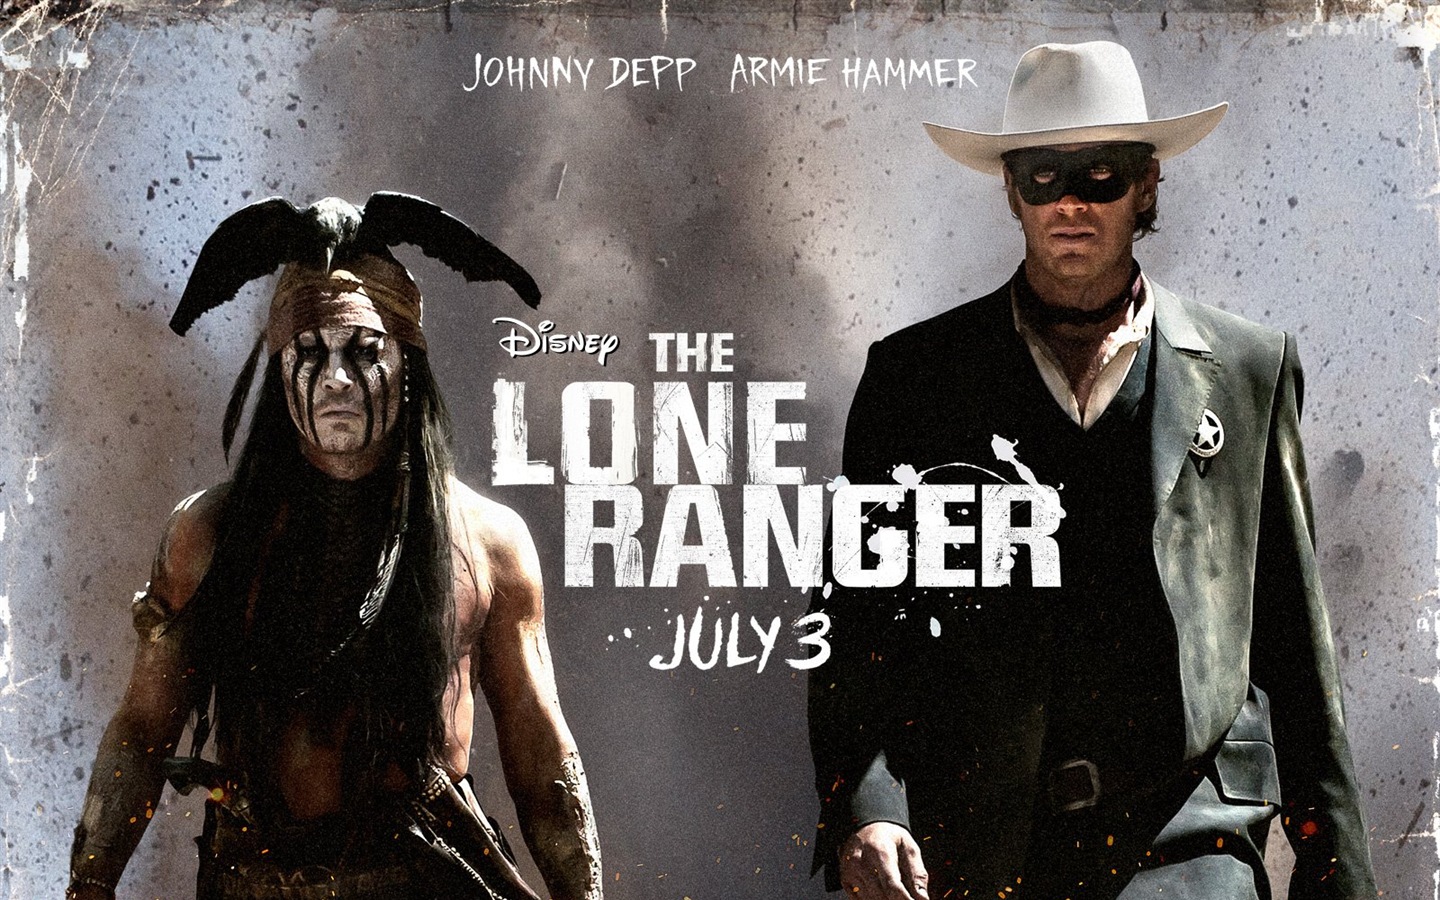 The Lone Ranger HD movie wallpapers #6 - 1440x900